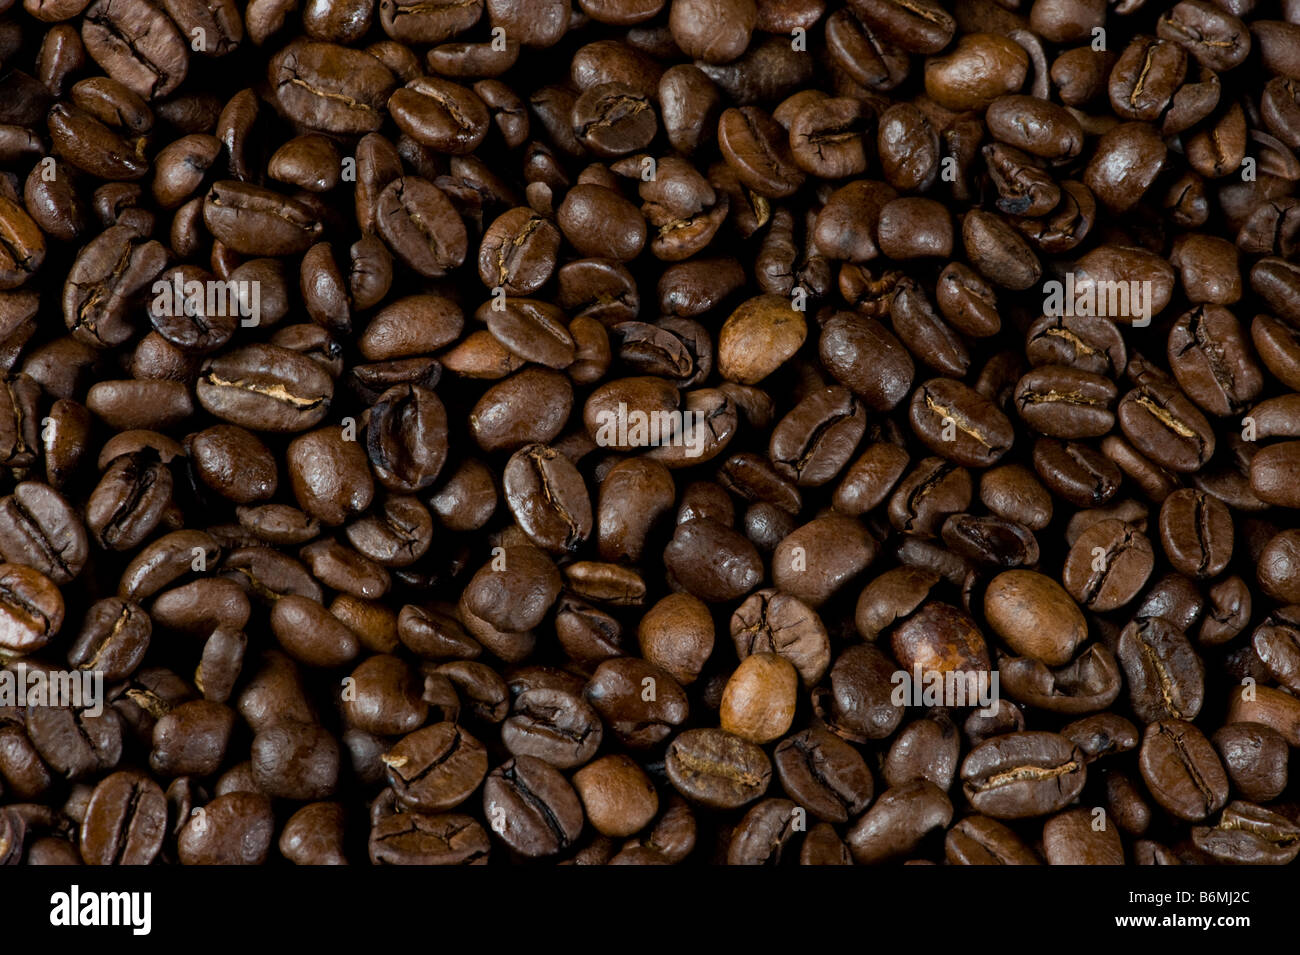 Texture, background of coffee beans Stock Photo